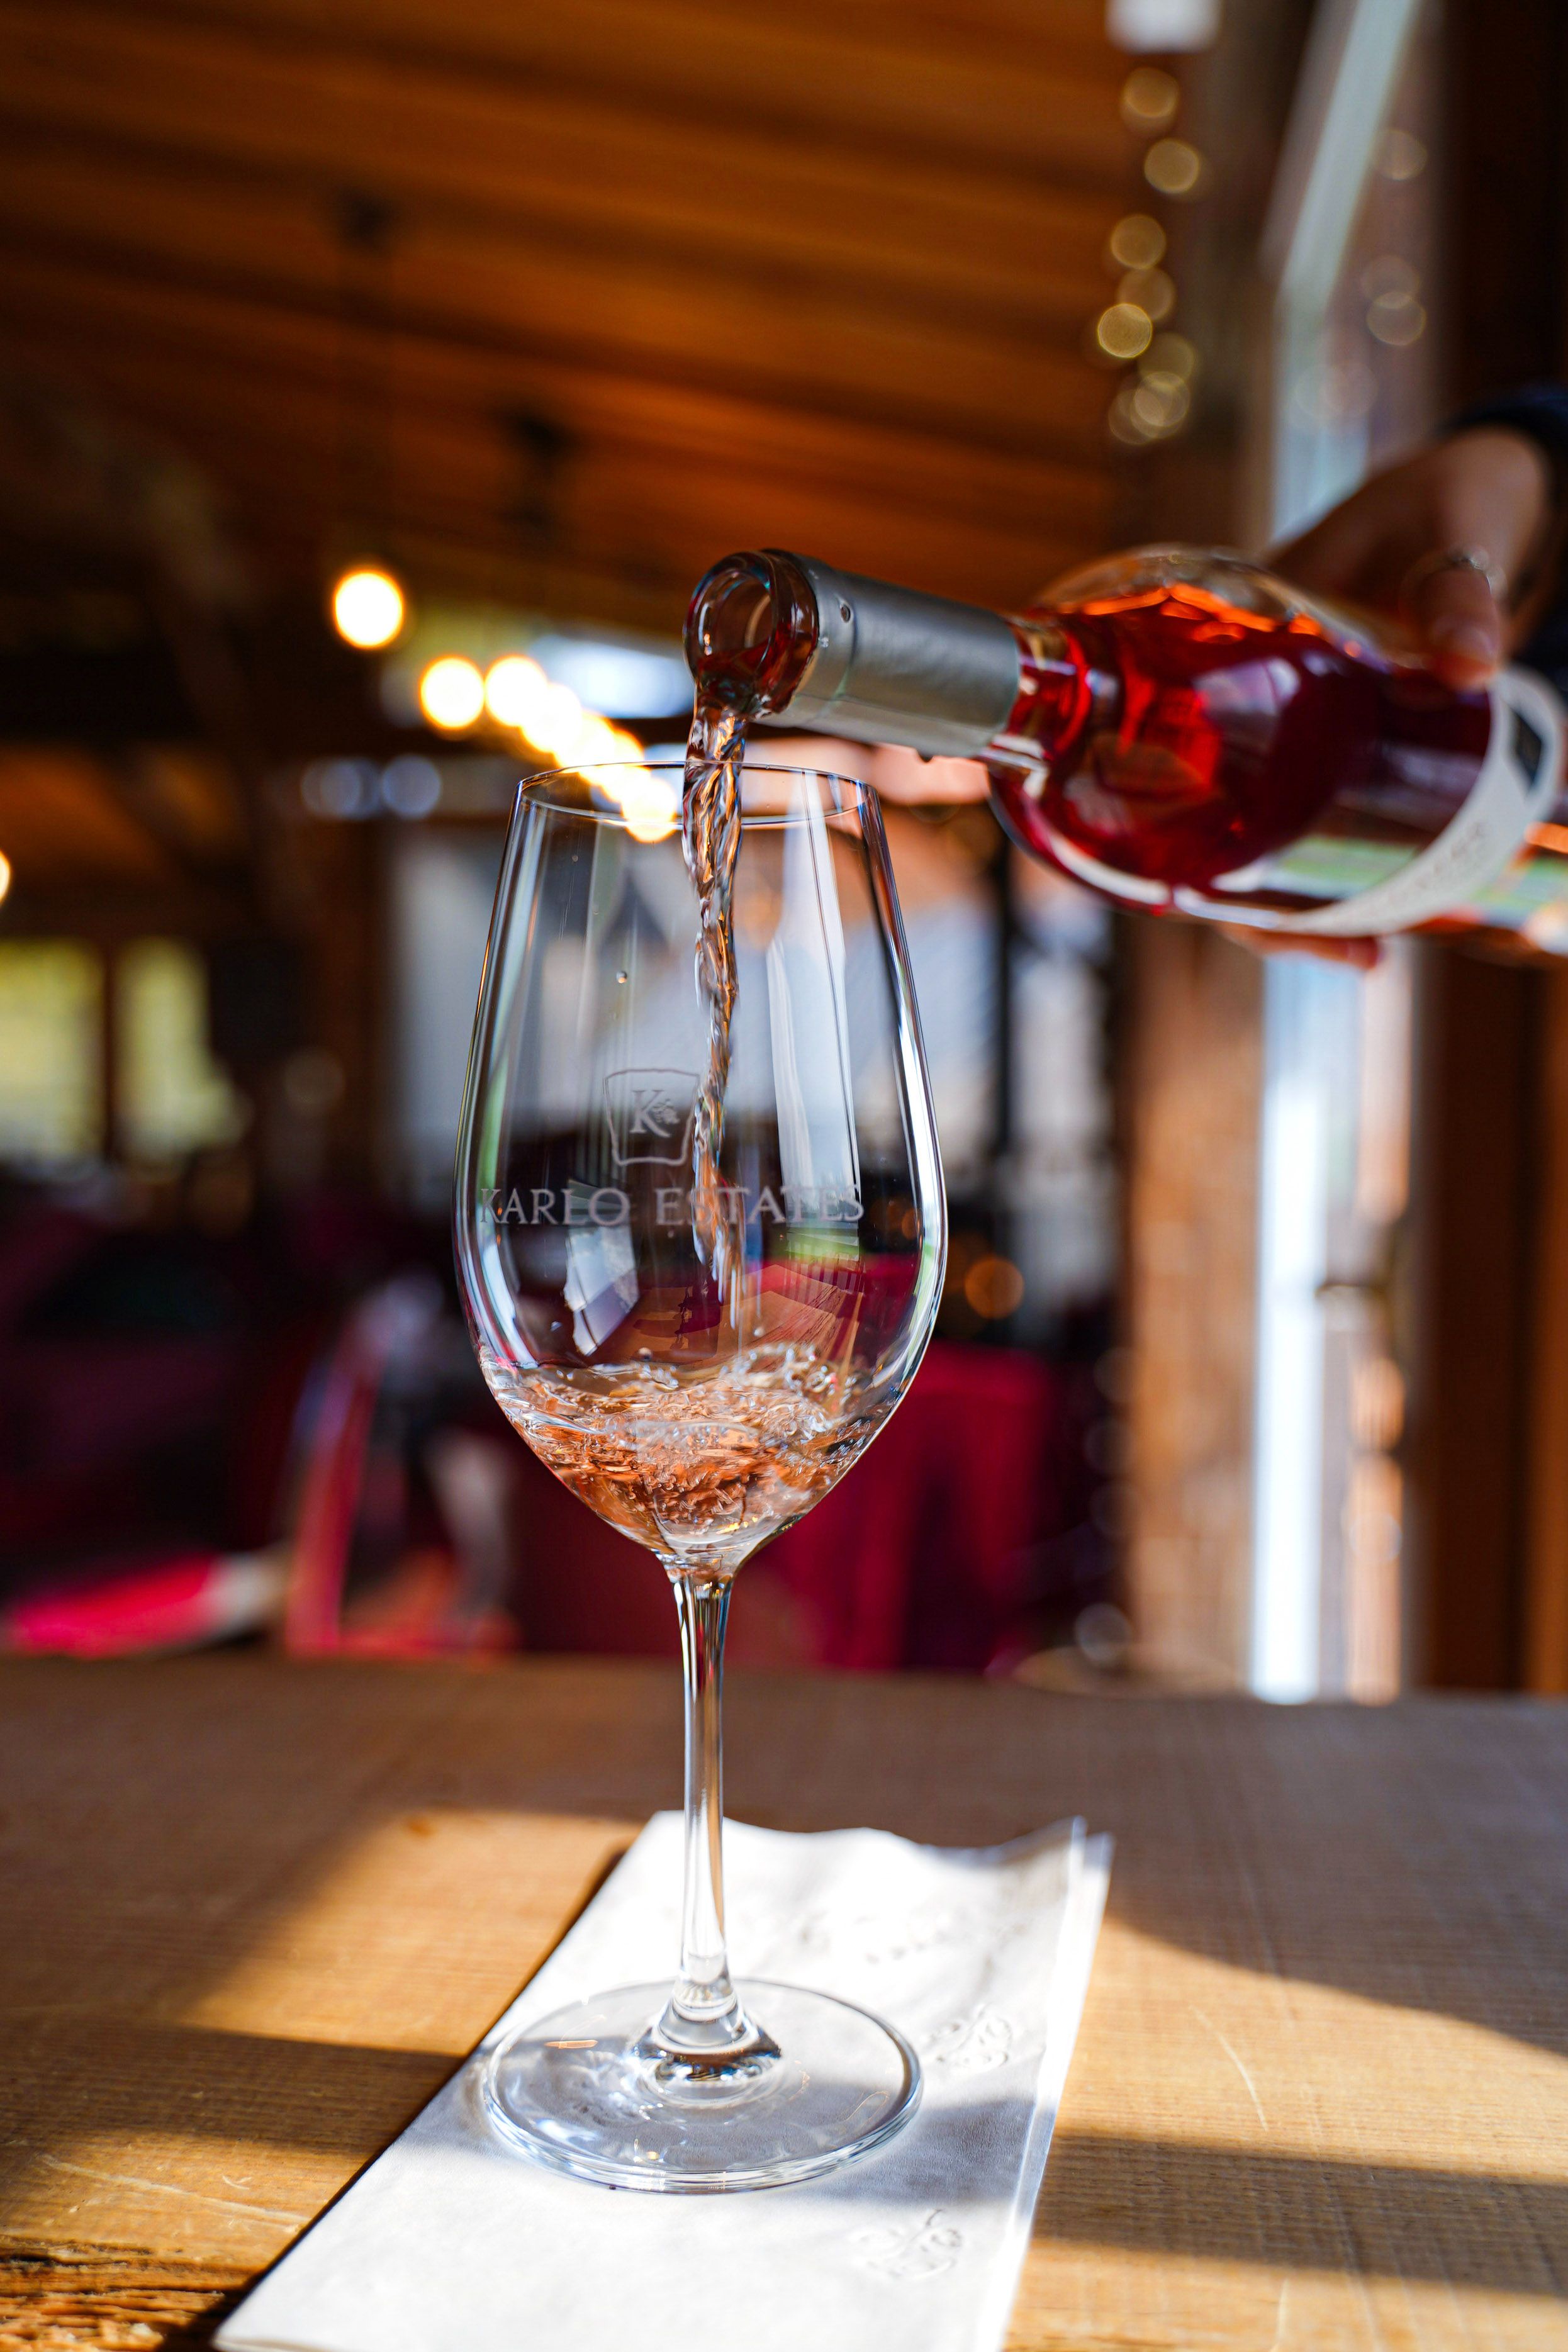 A glass of wine being poured in a luxurious cabin-style restaurant